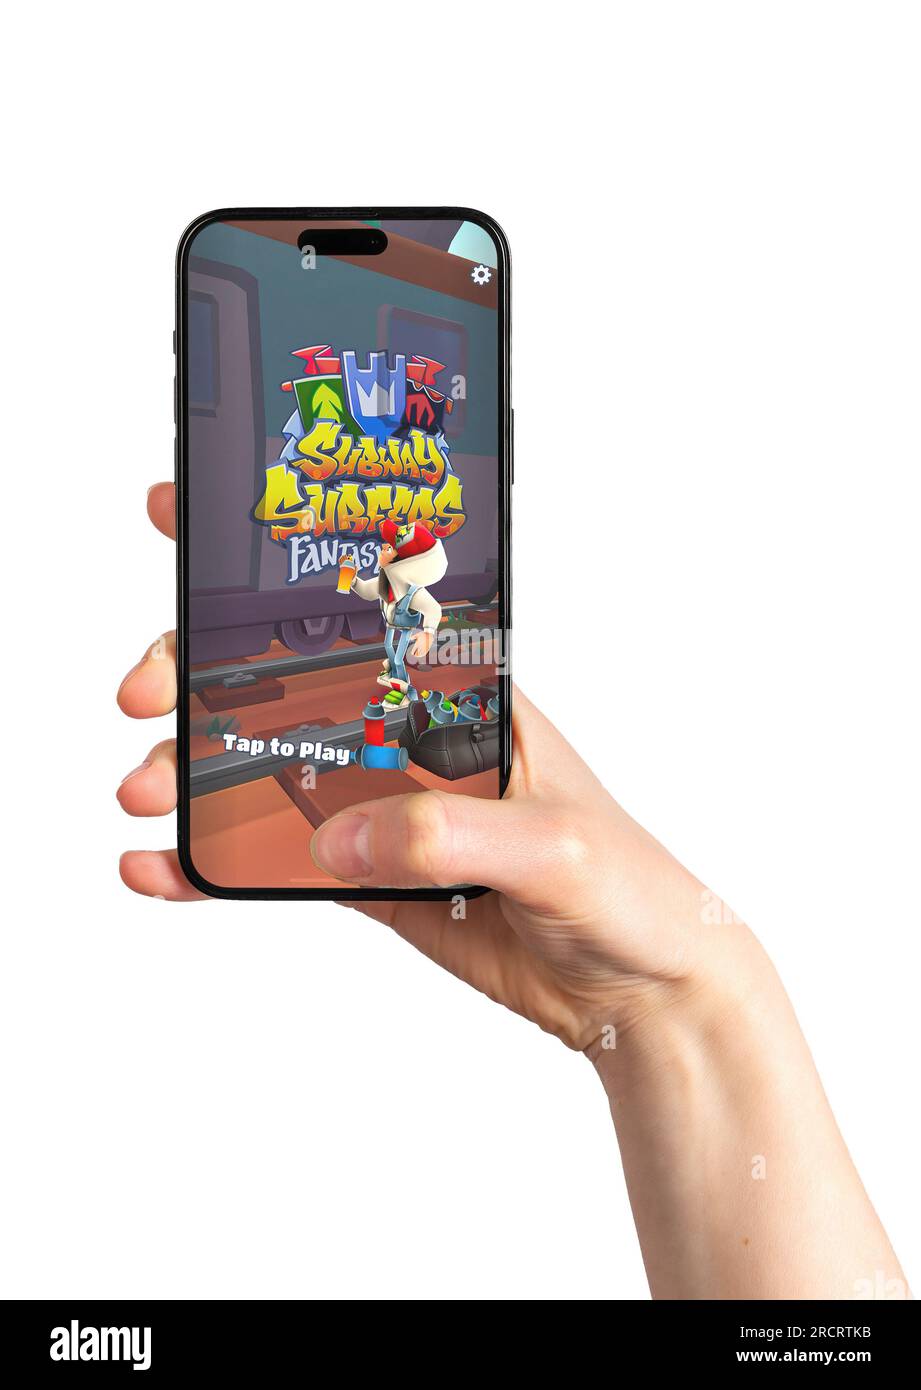 How to Make Subway Surfer Game from Cardboard with Touch Screen 